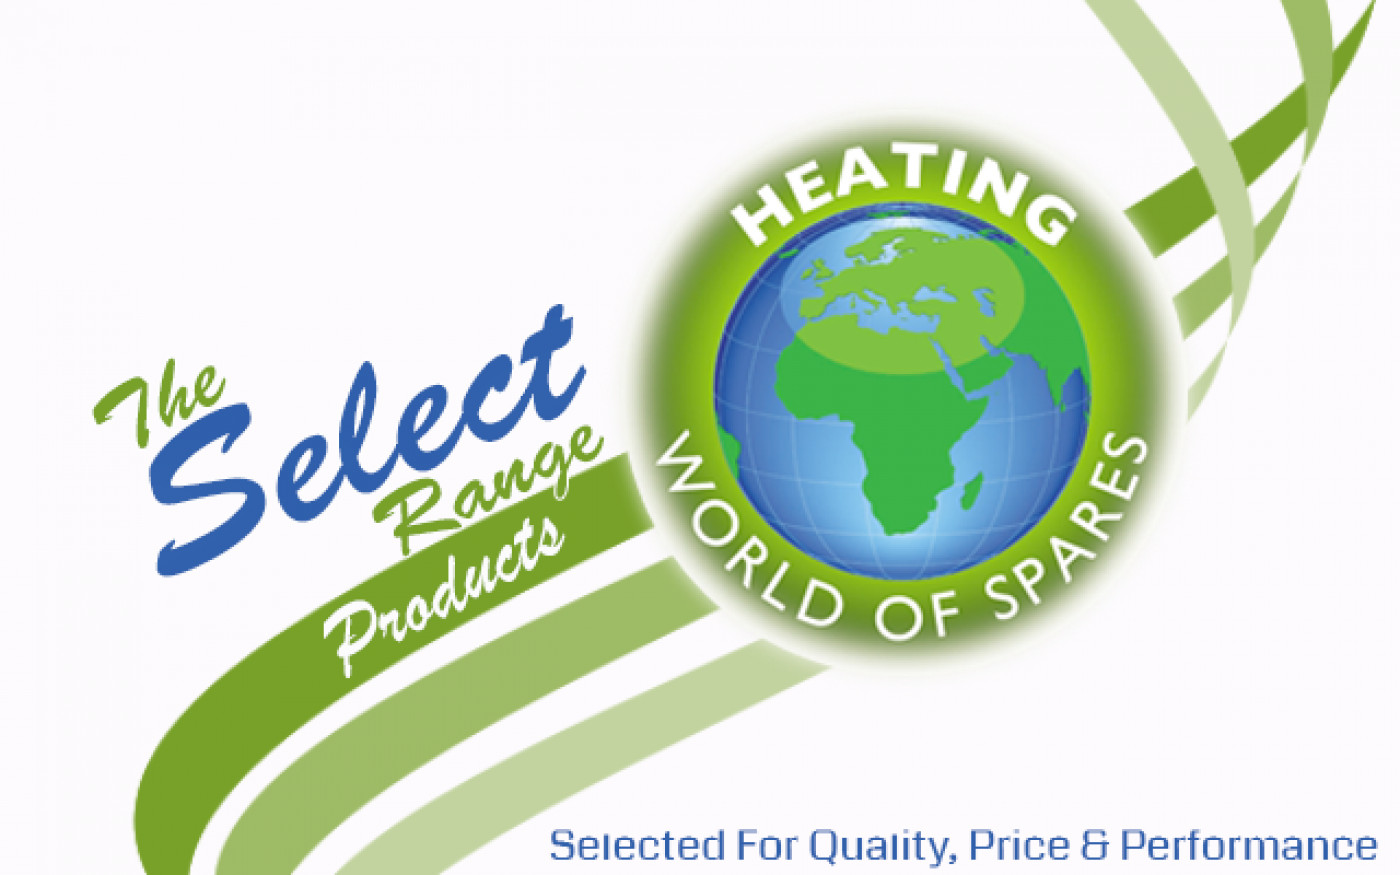 Heating World of Spares Own Brand Products